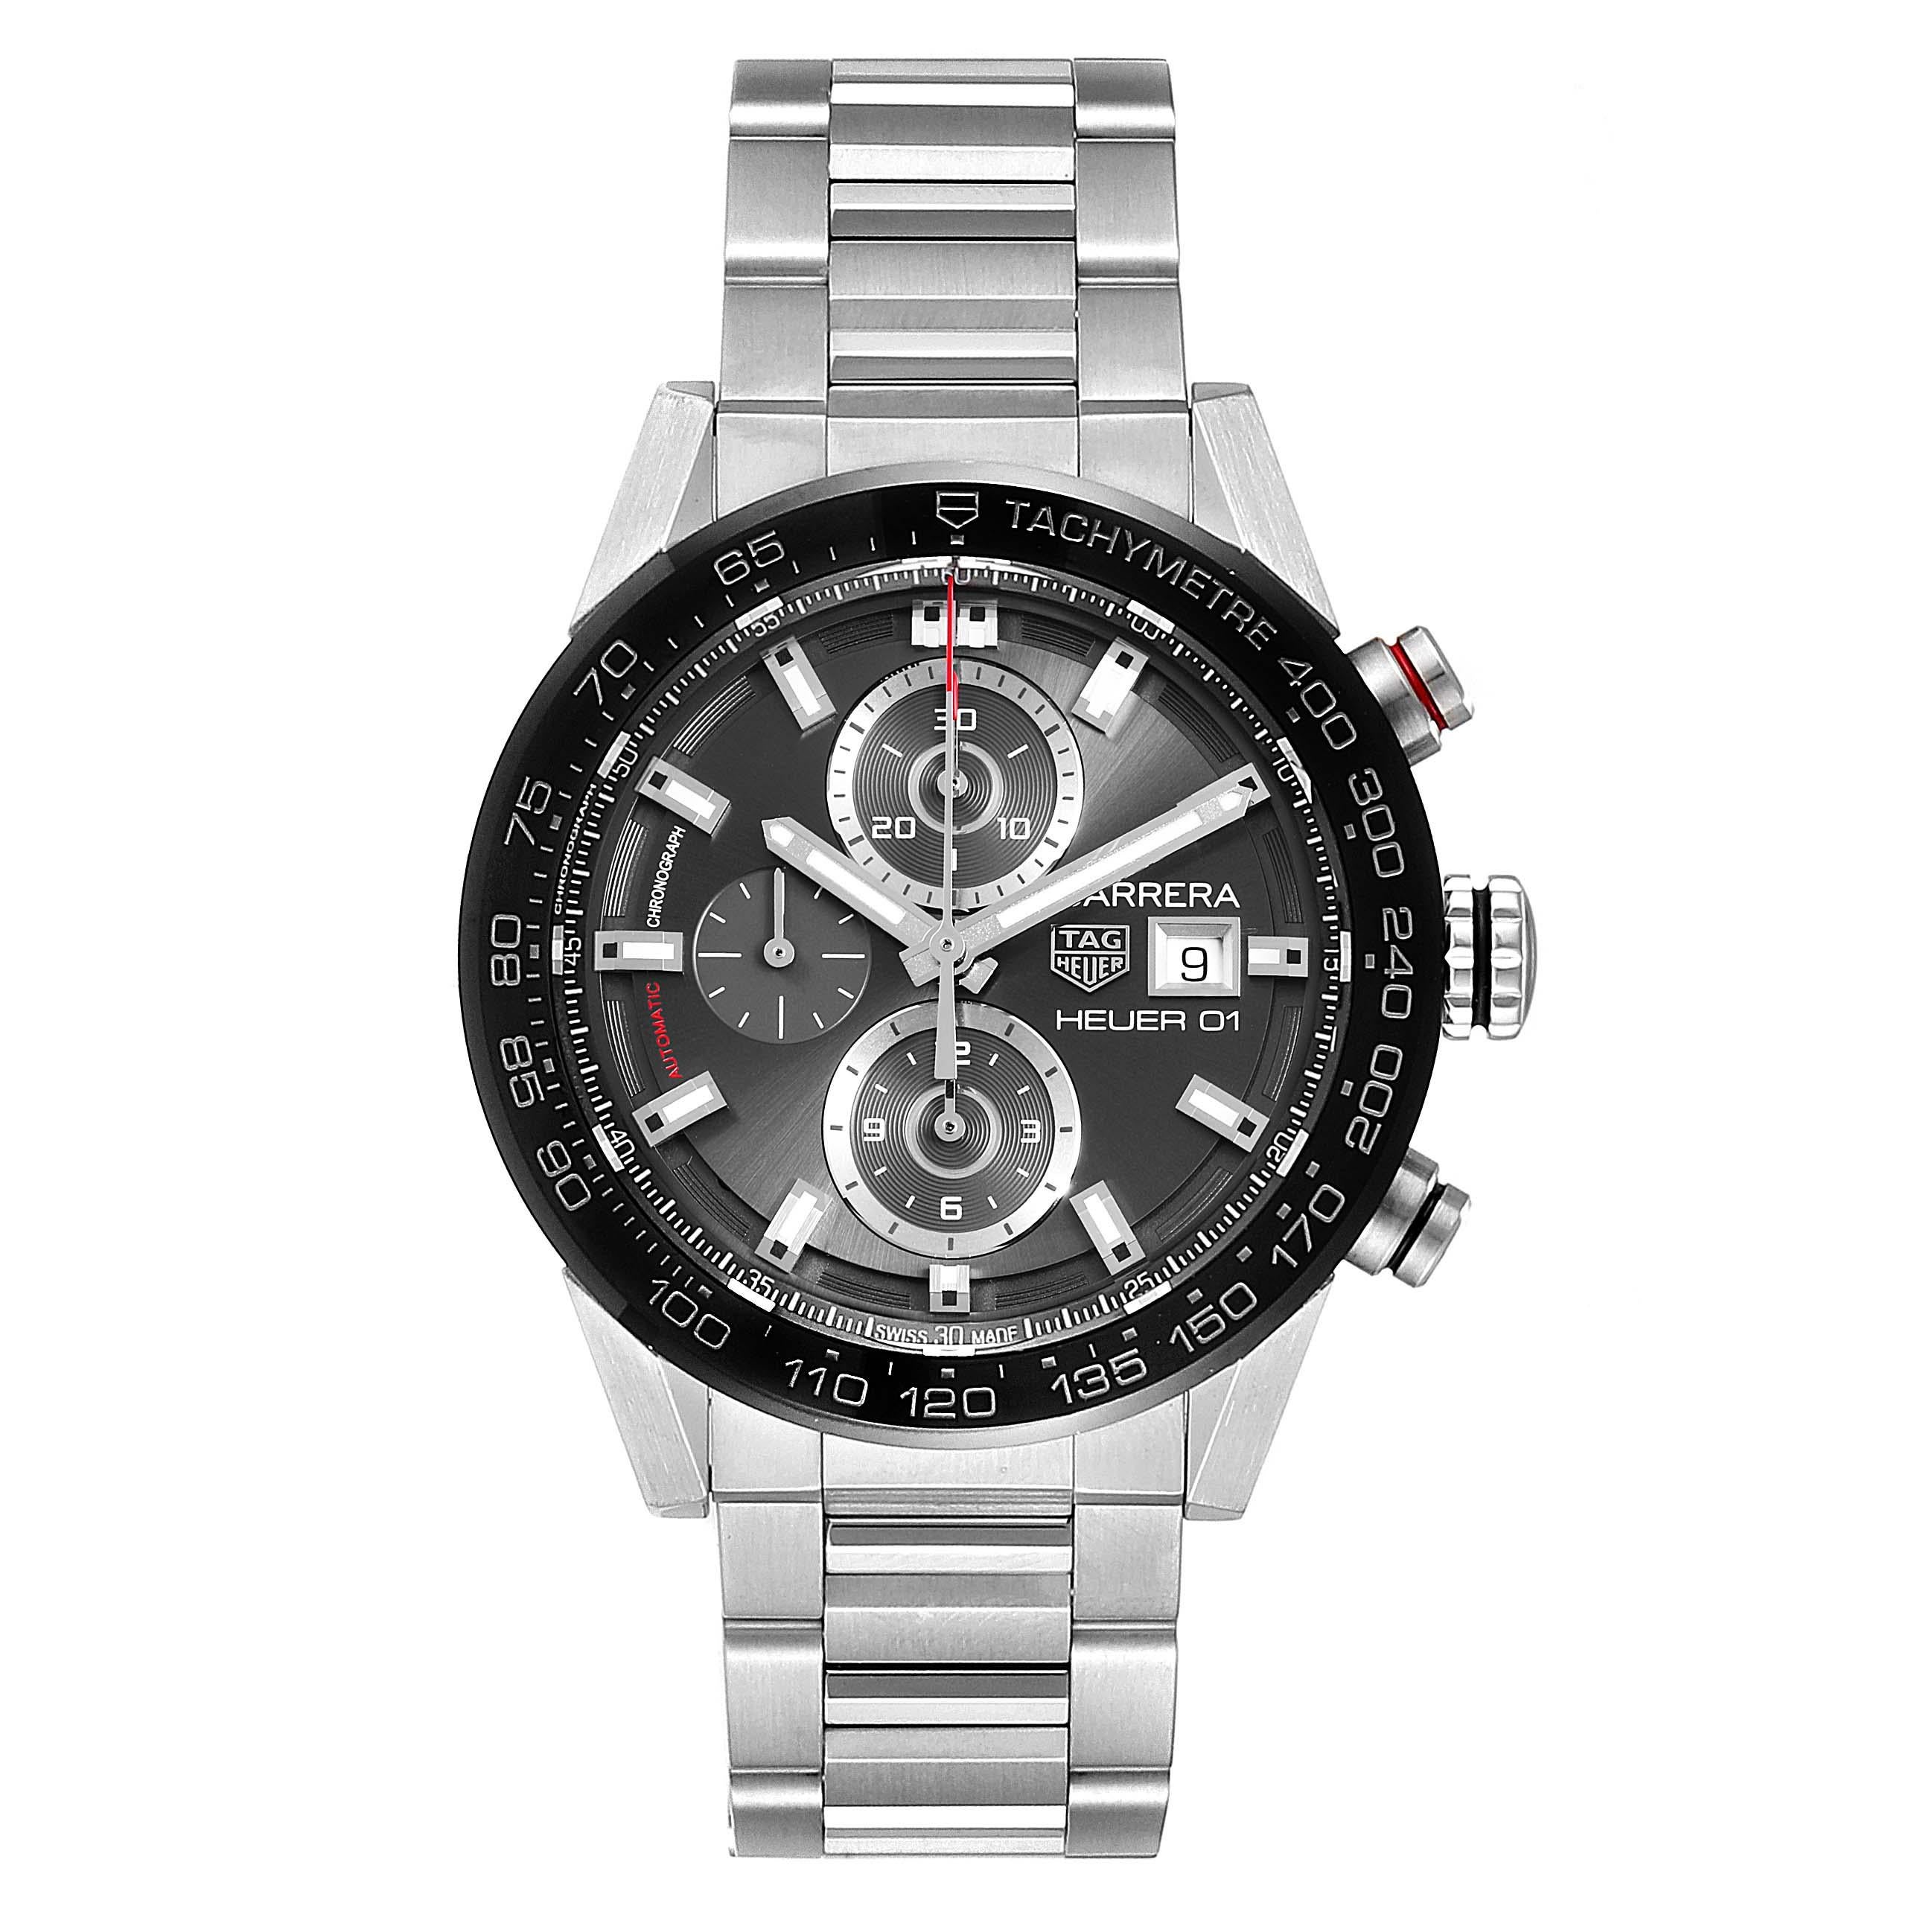 Tag Heuer Carrera Chronograph Automatic Mens Watch CAR201W Box Card. Automatic self-winding chronograph movement. Stainless steel case 43.0 mm. Exhibition sapphire crystal case back. Black bezel with tachymeter scale. Scratch resistant sapphire